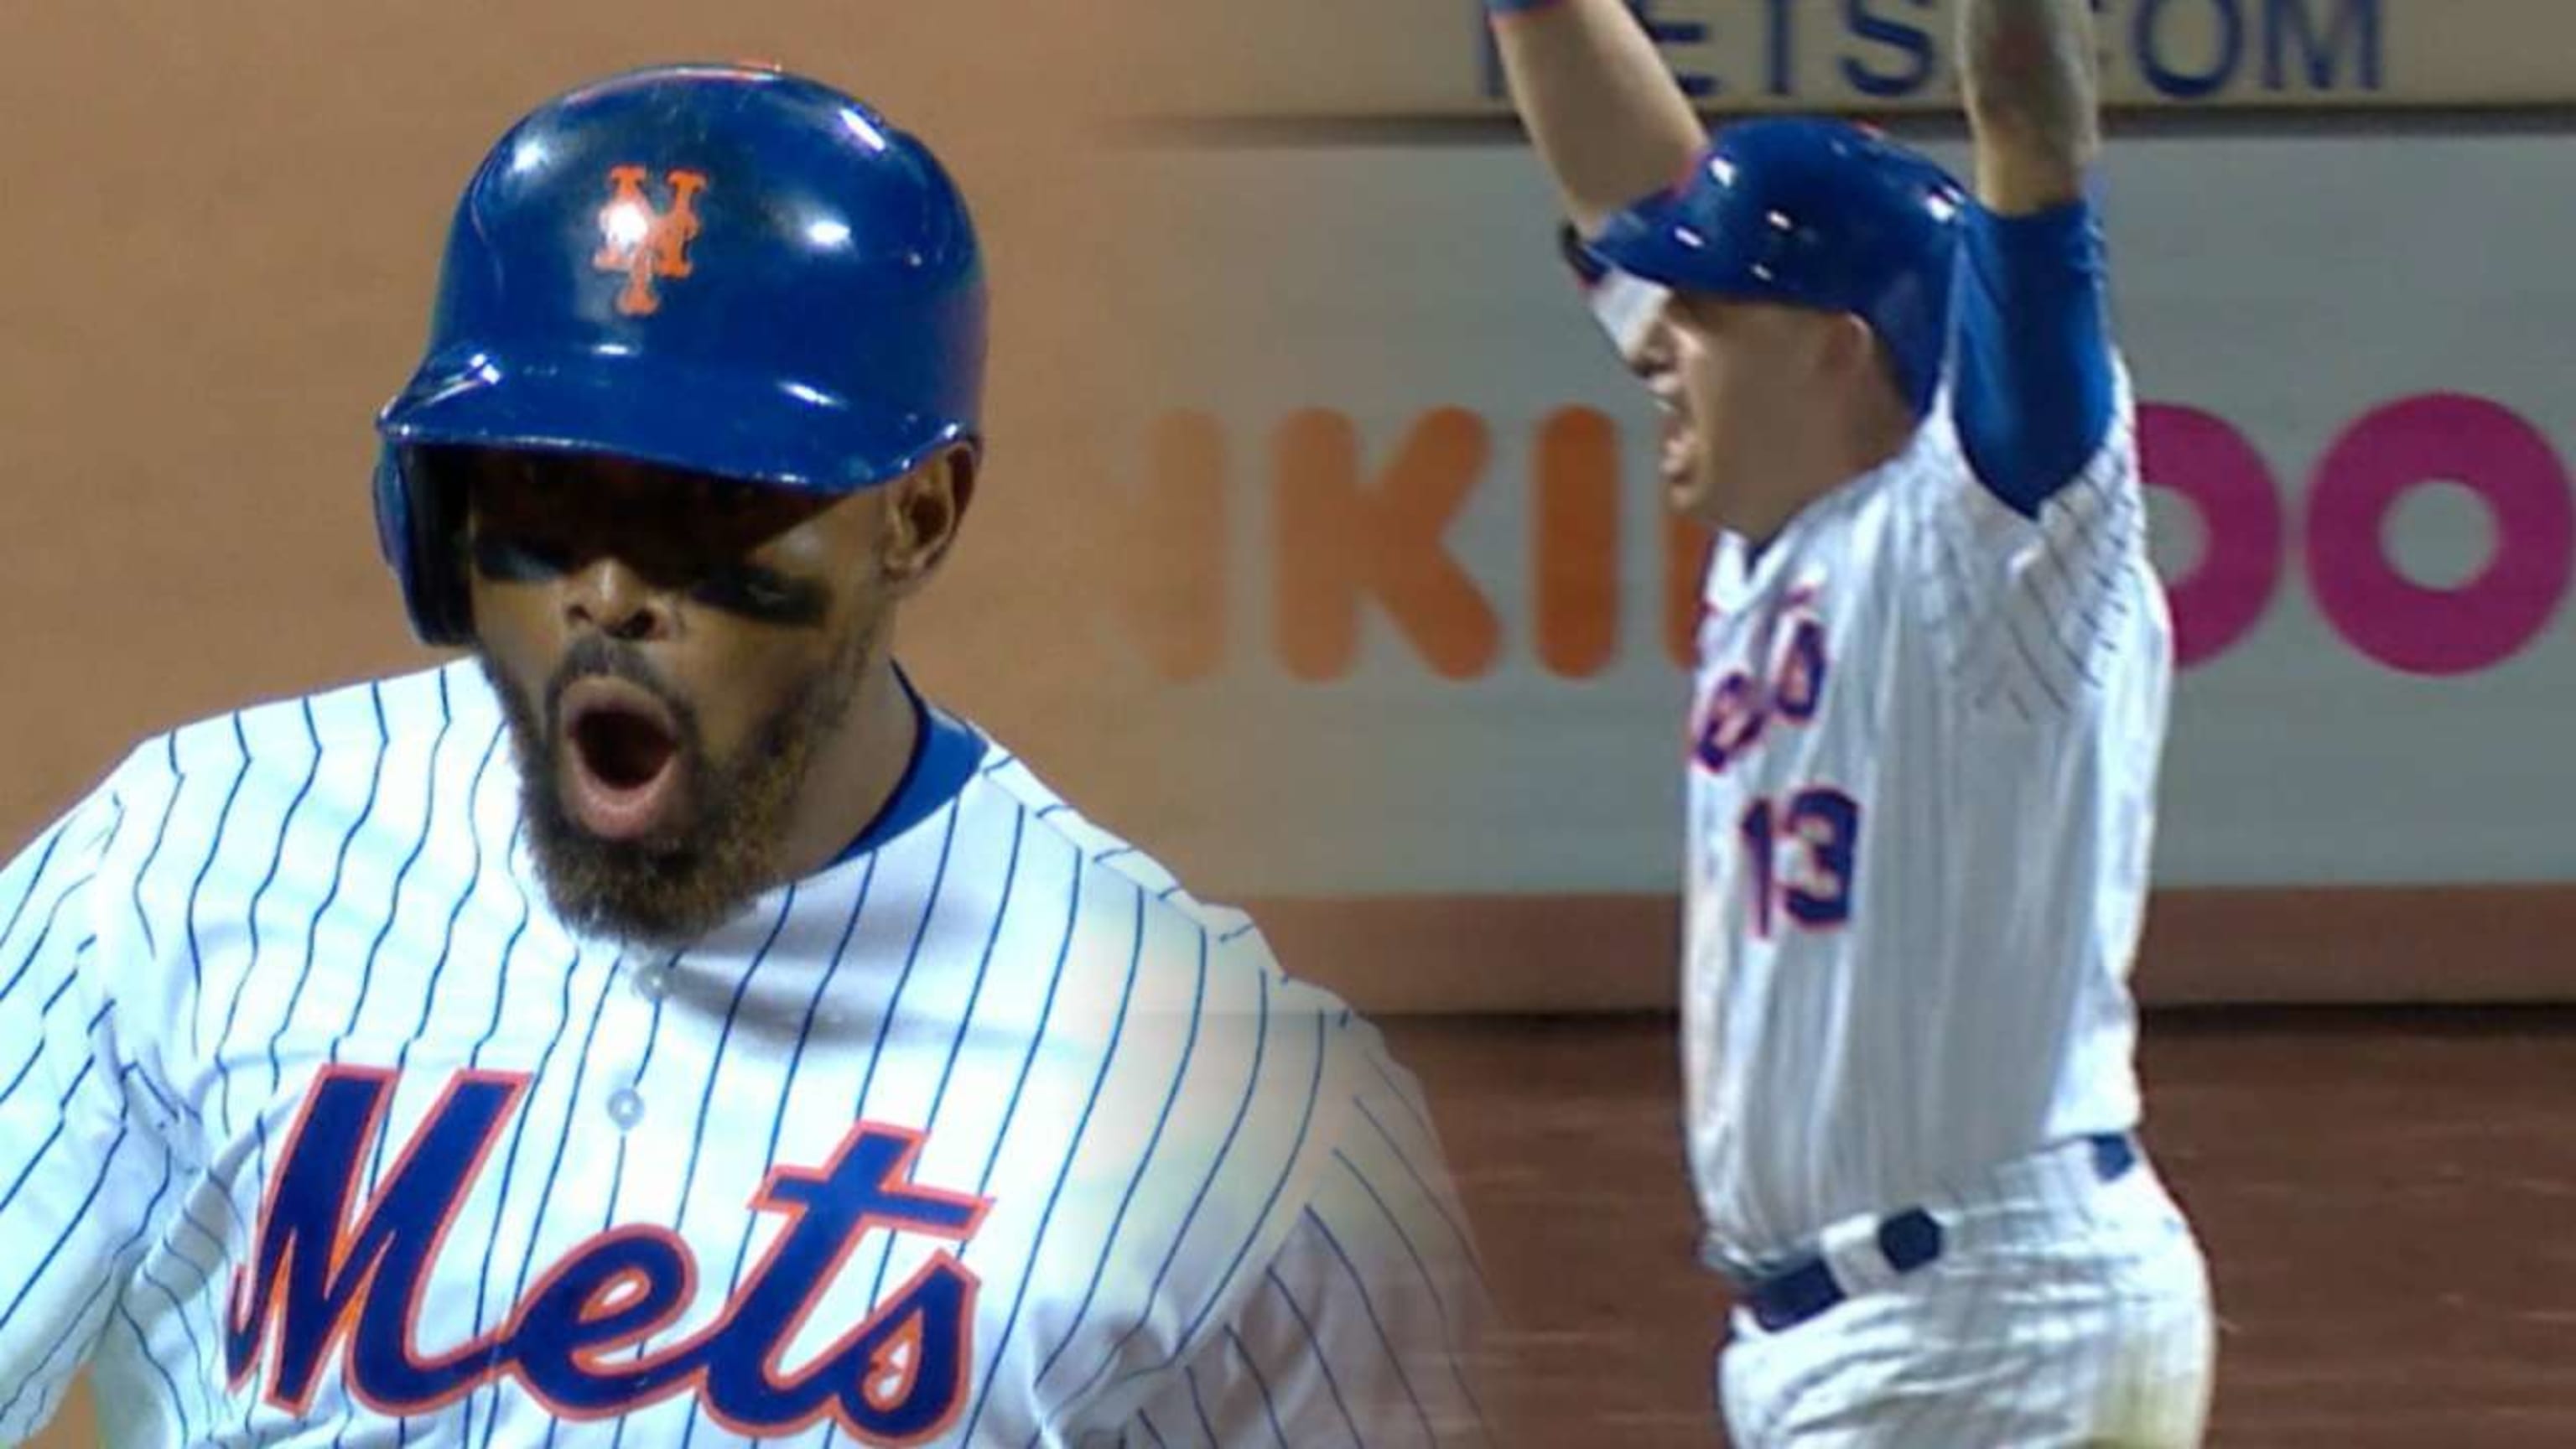 Conforto walk-off hit caps NY Mets' 4-run rally in 9th to beat Nats